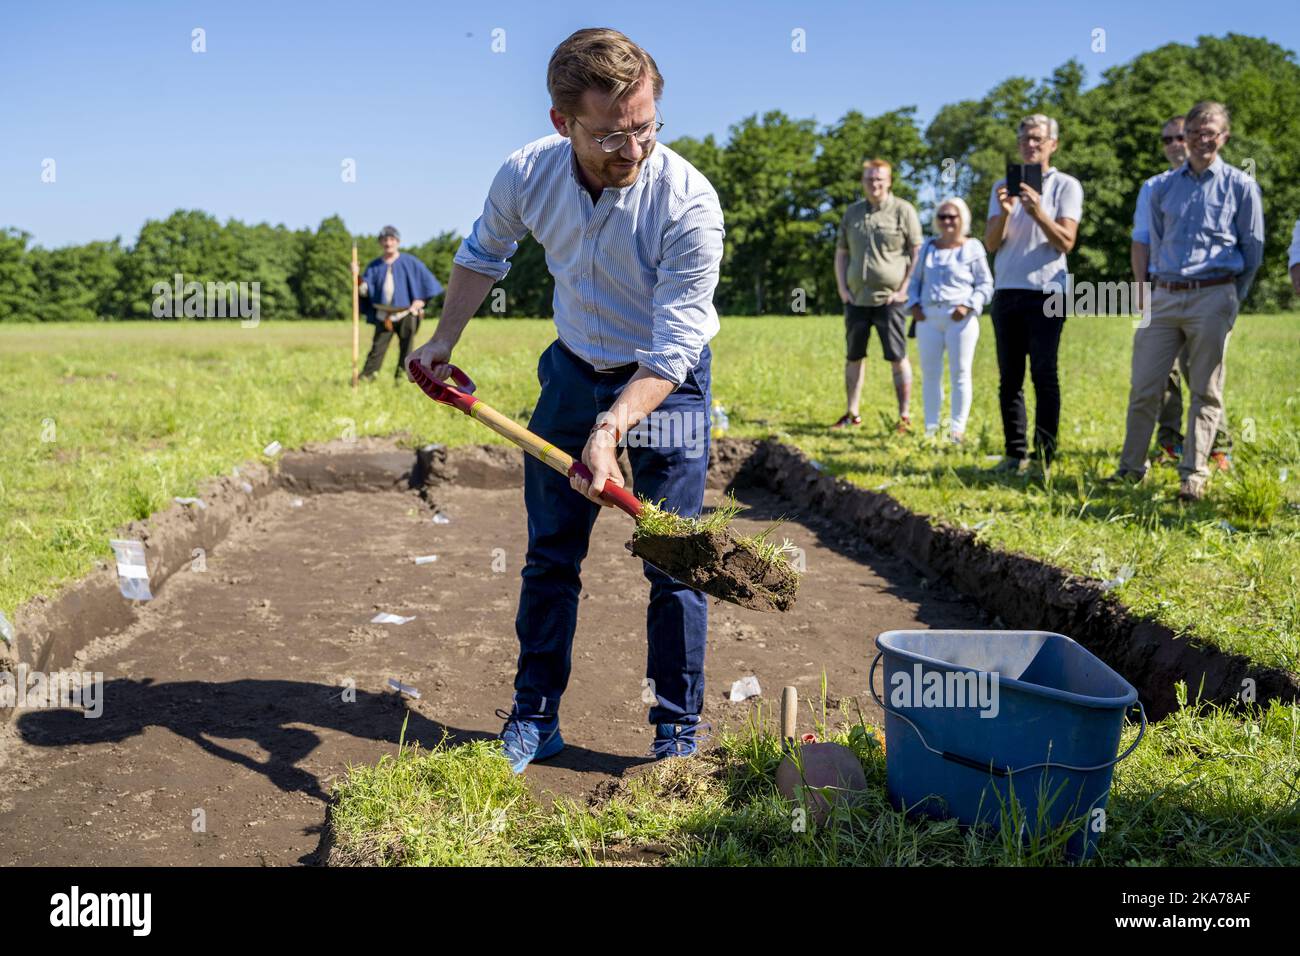 Halden, Norway 20200626. Norway´s Minister of Climate and Environment Sveinung Rotevatn officially starts the excavation of Gjellestadskipet, a viking ship discovered in the ground near Halden, some 100 km south of Oslo. Photo: Fredrik Hagen / NTB scanpix  Stock Photo